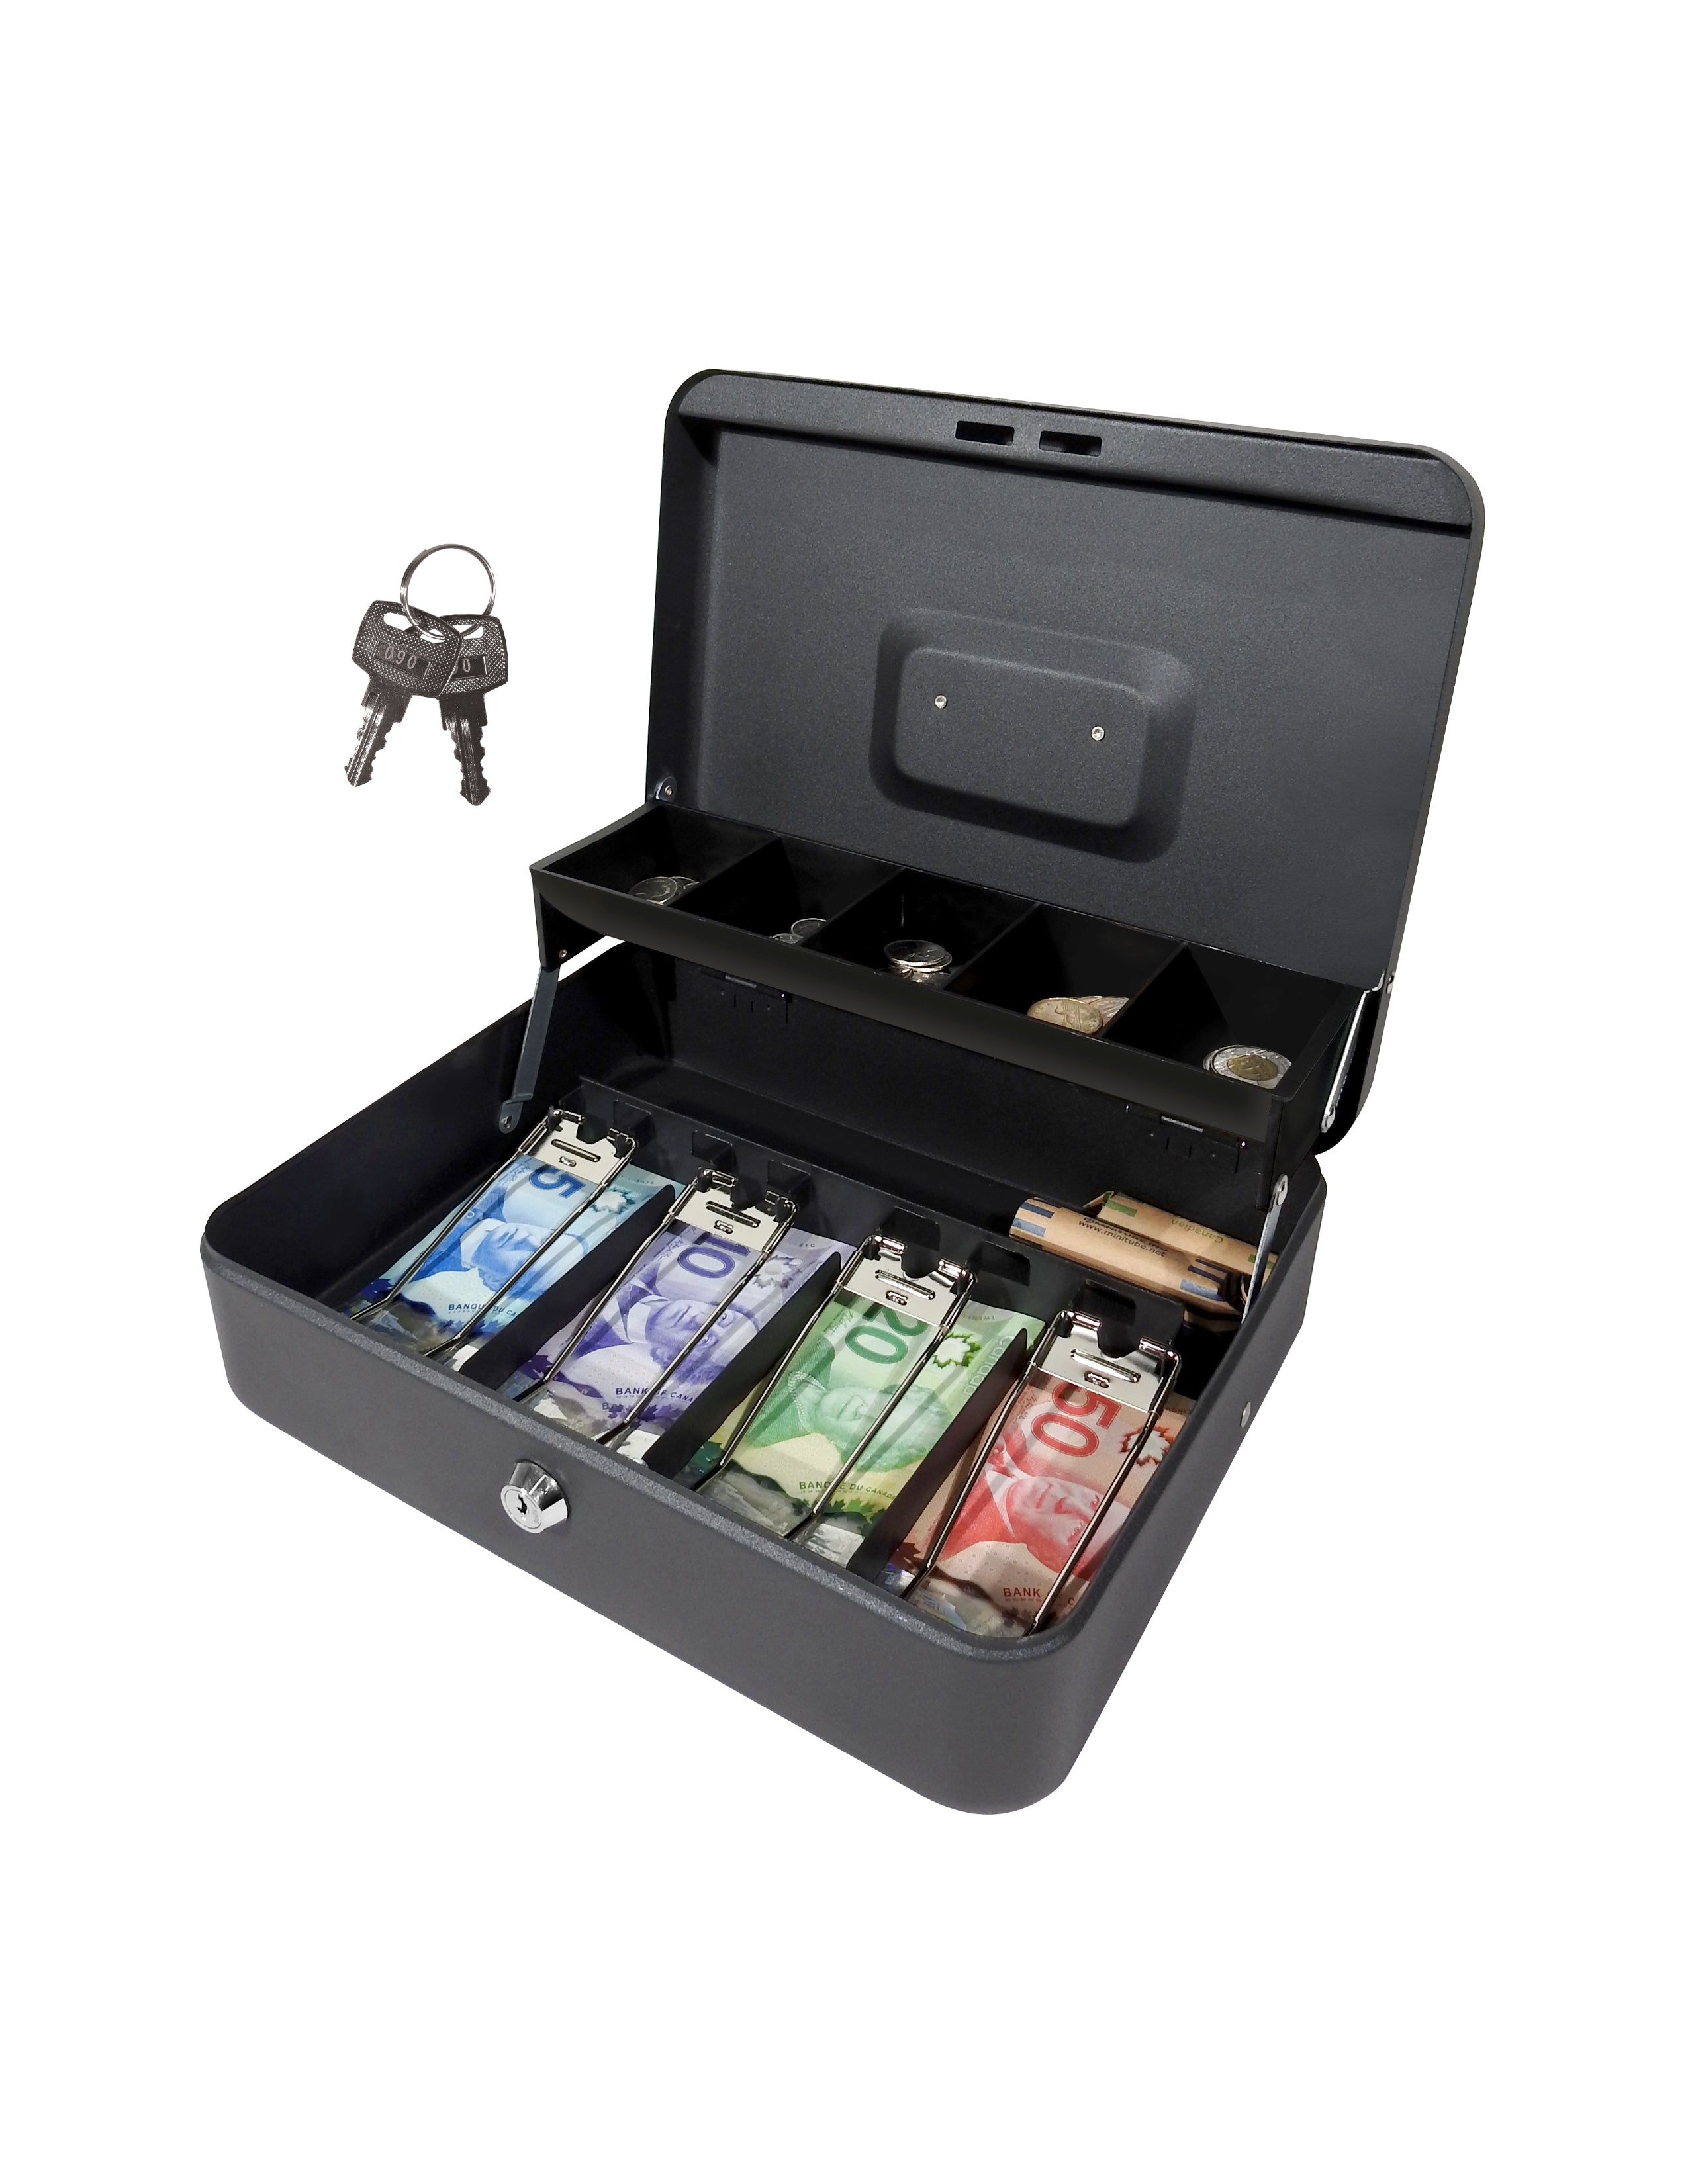 CMCB-400/ Tiered Tray Deluxe Cash Box